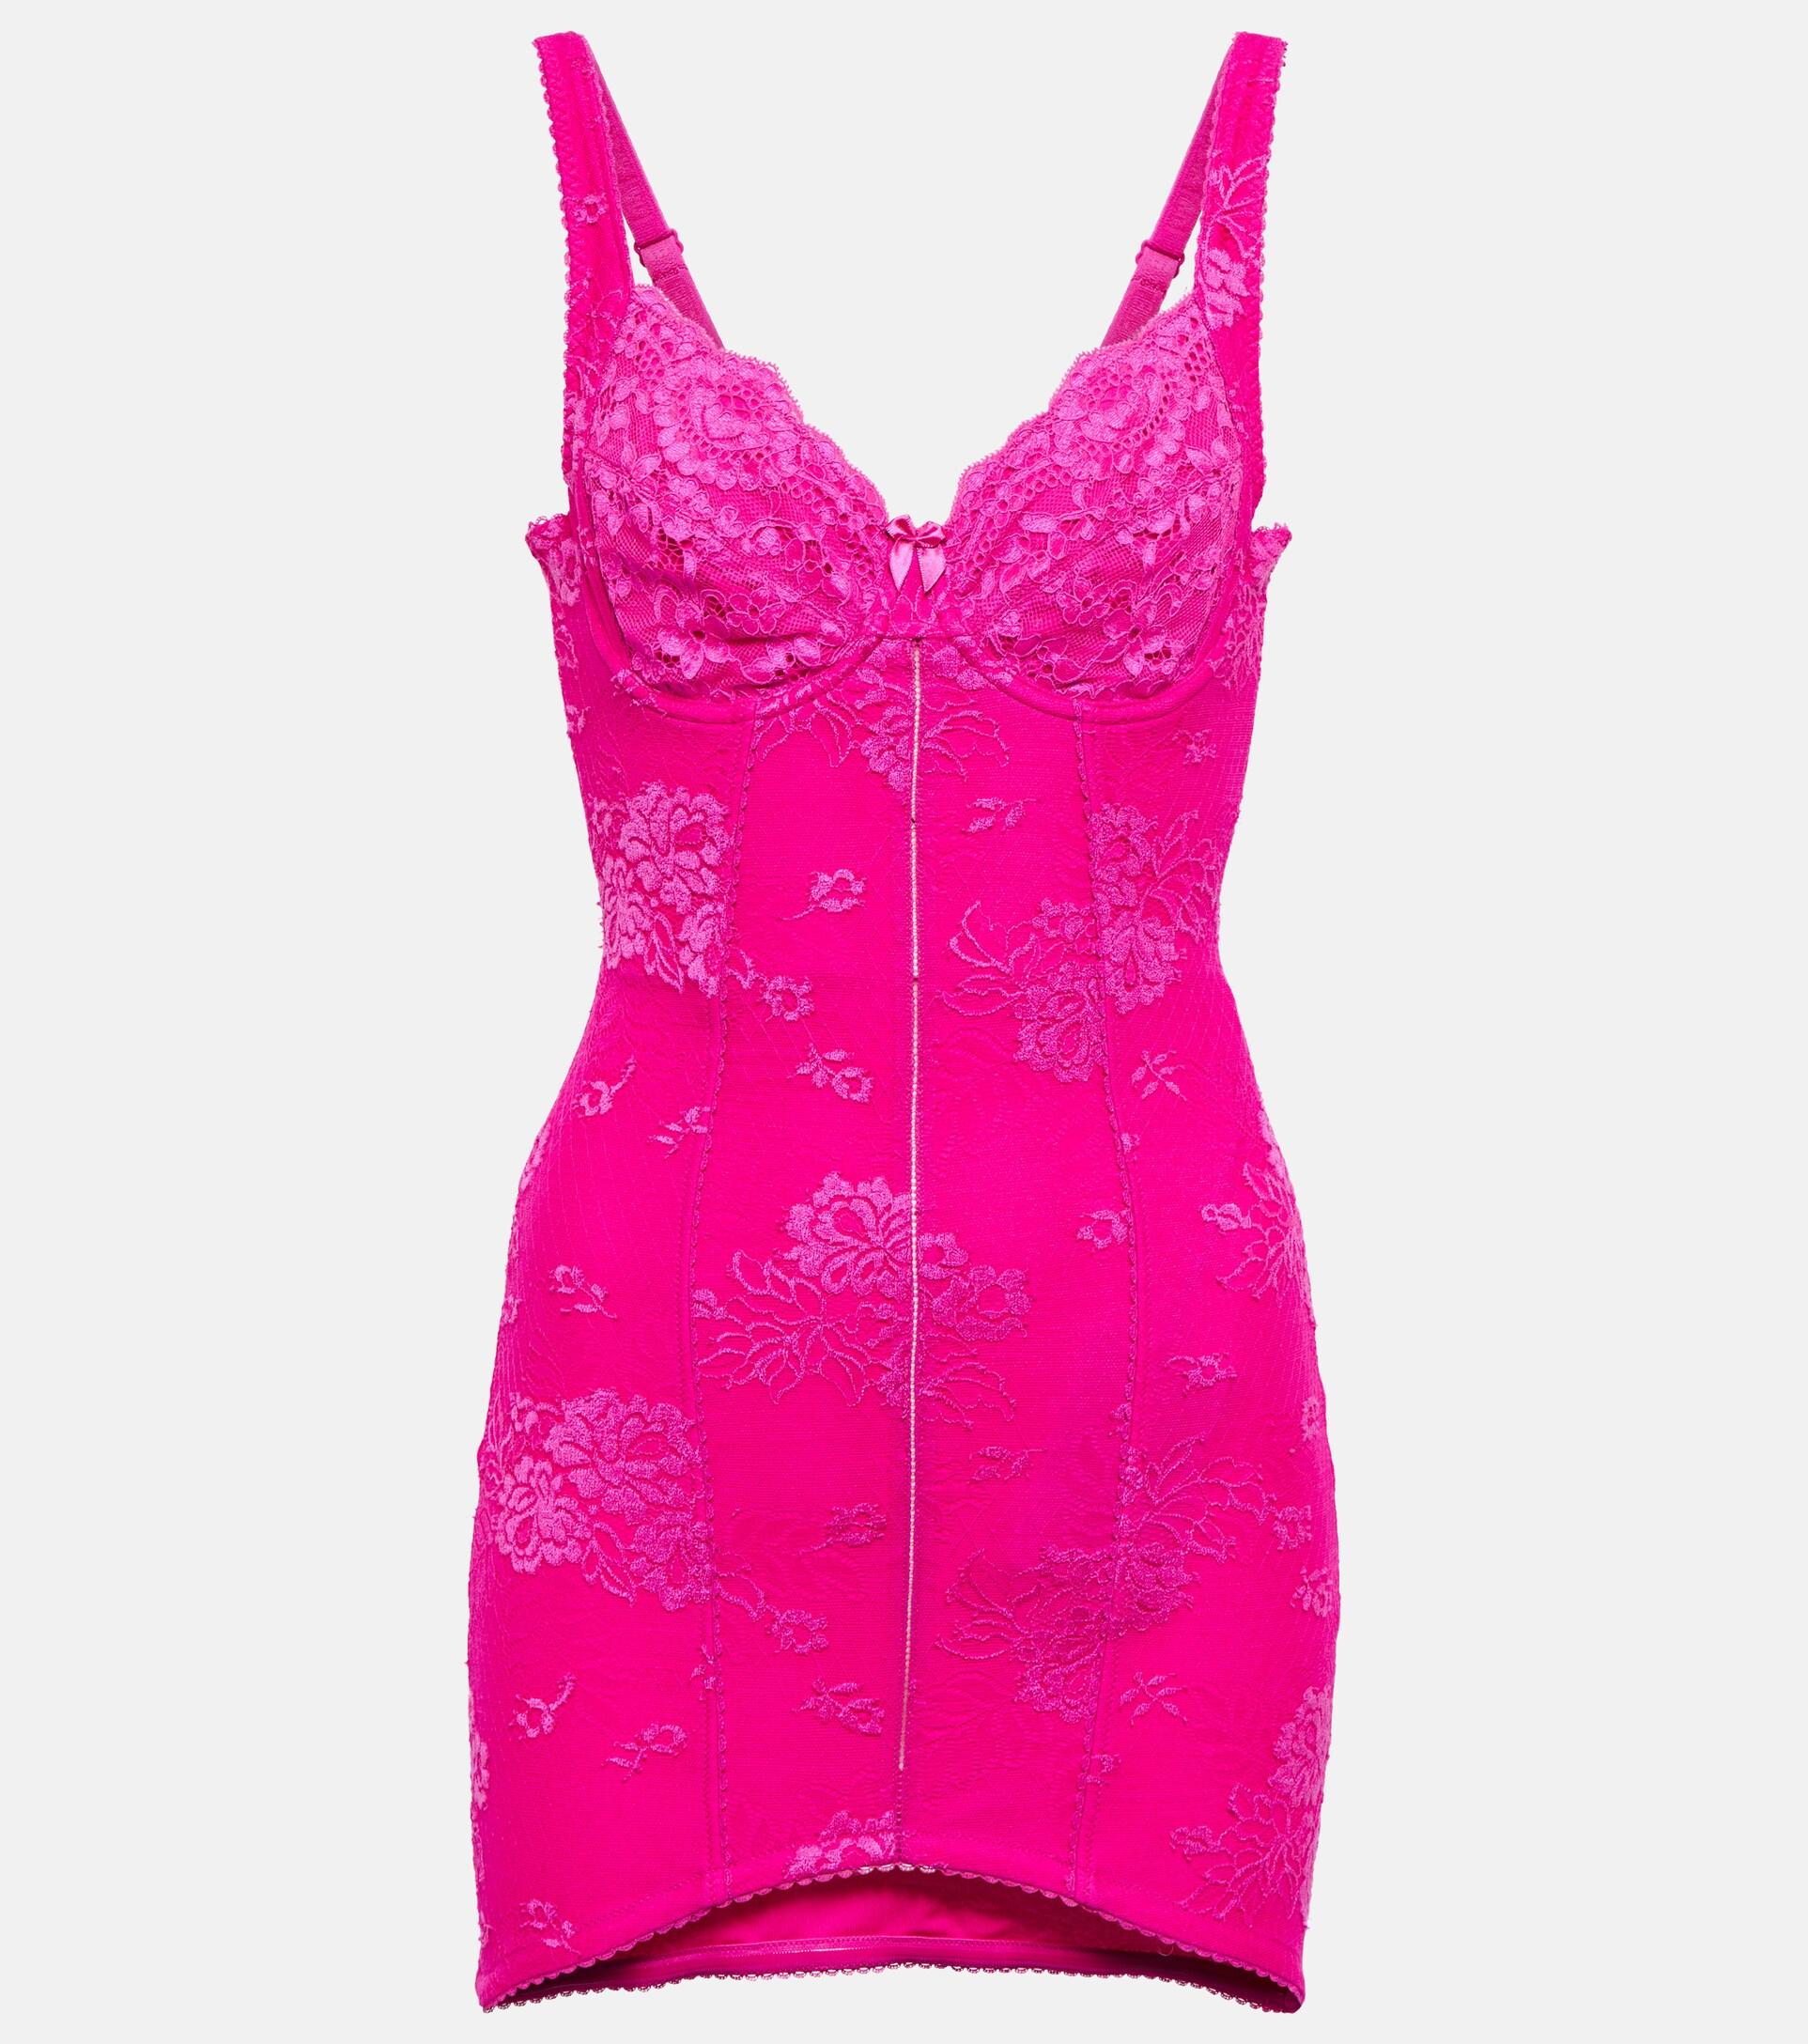 Balenciaga Lingerie Lace Minidress in Pink | Lyst